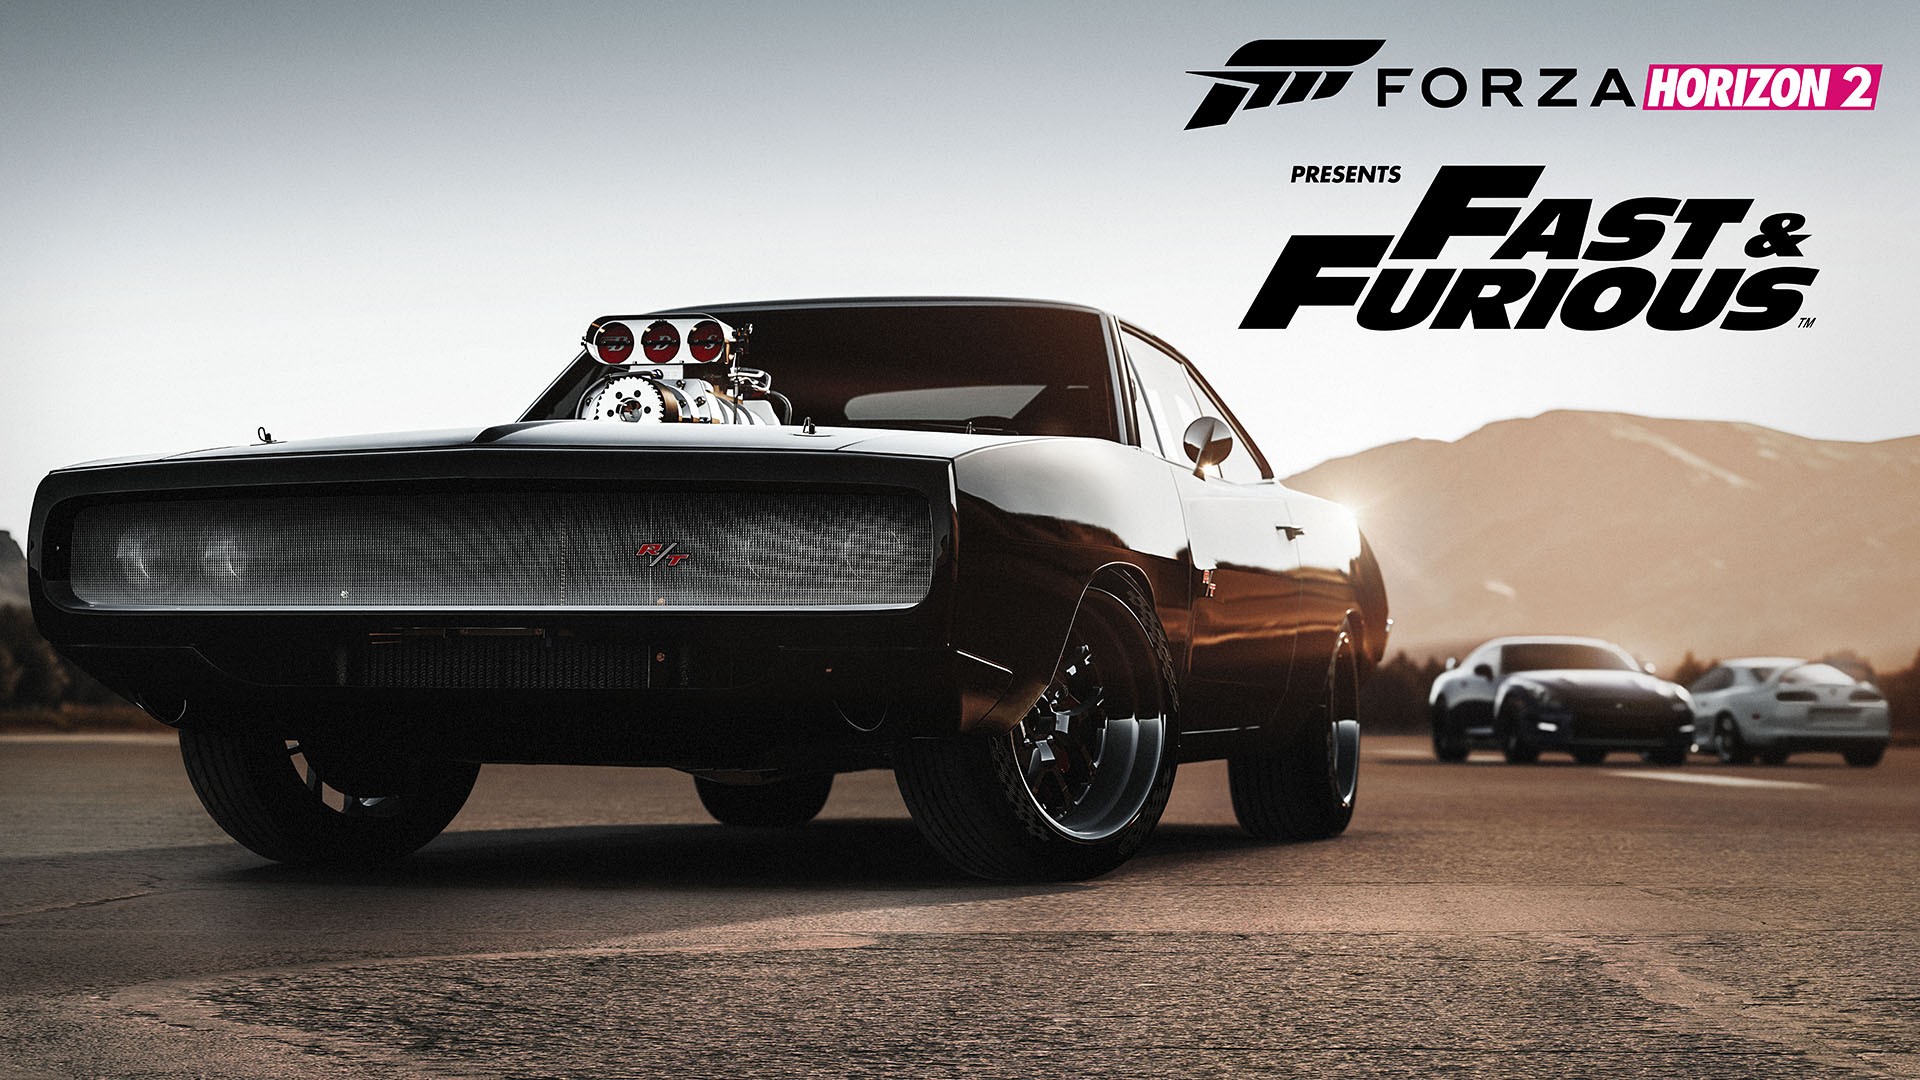 Fast And Furious, Forza Horizon 2, Forza, Forza Motorsport, Video Games Wallpaper